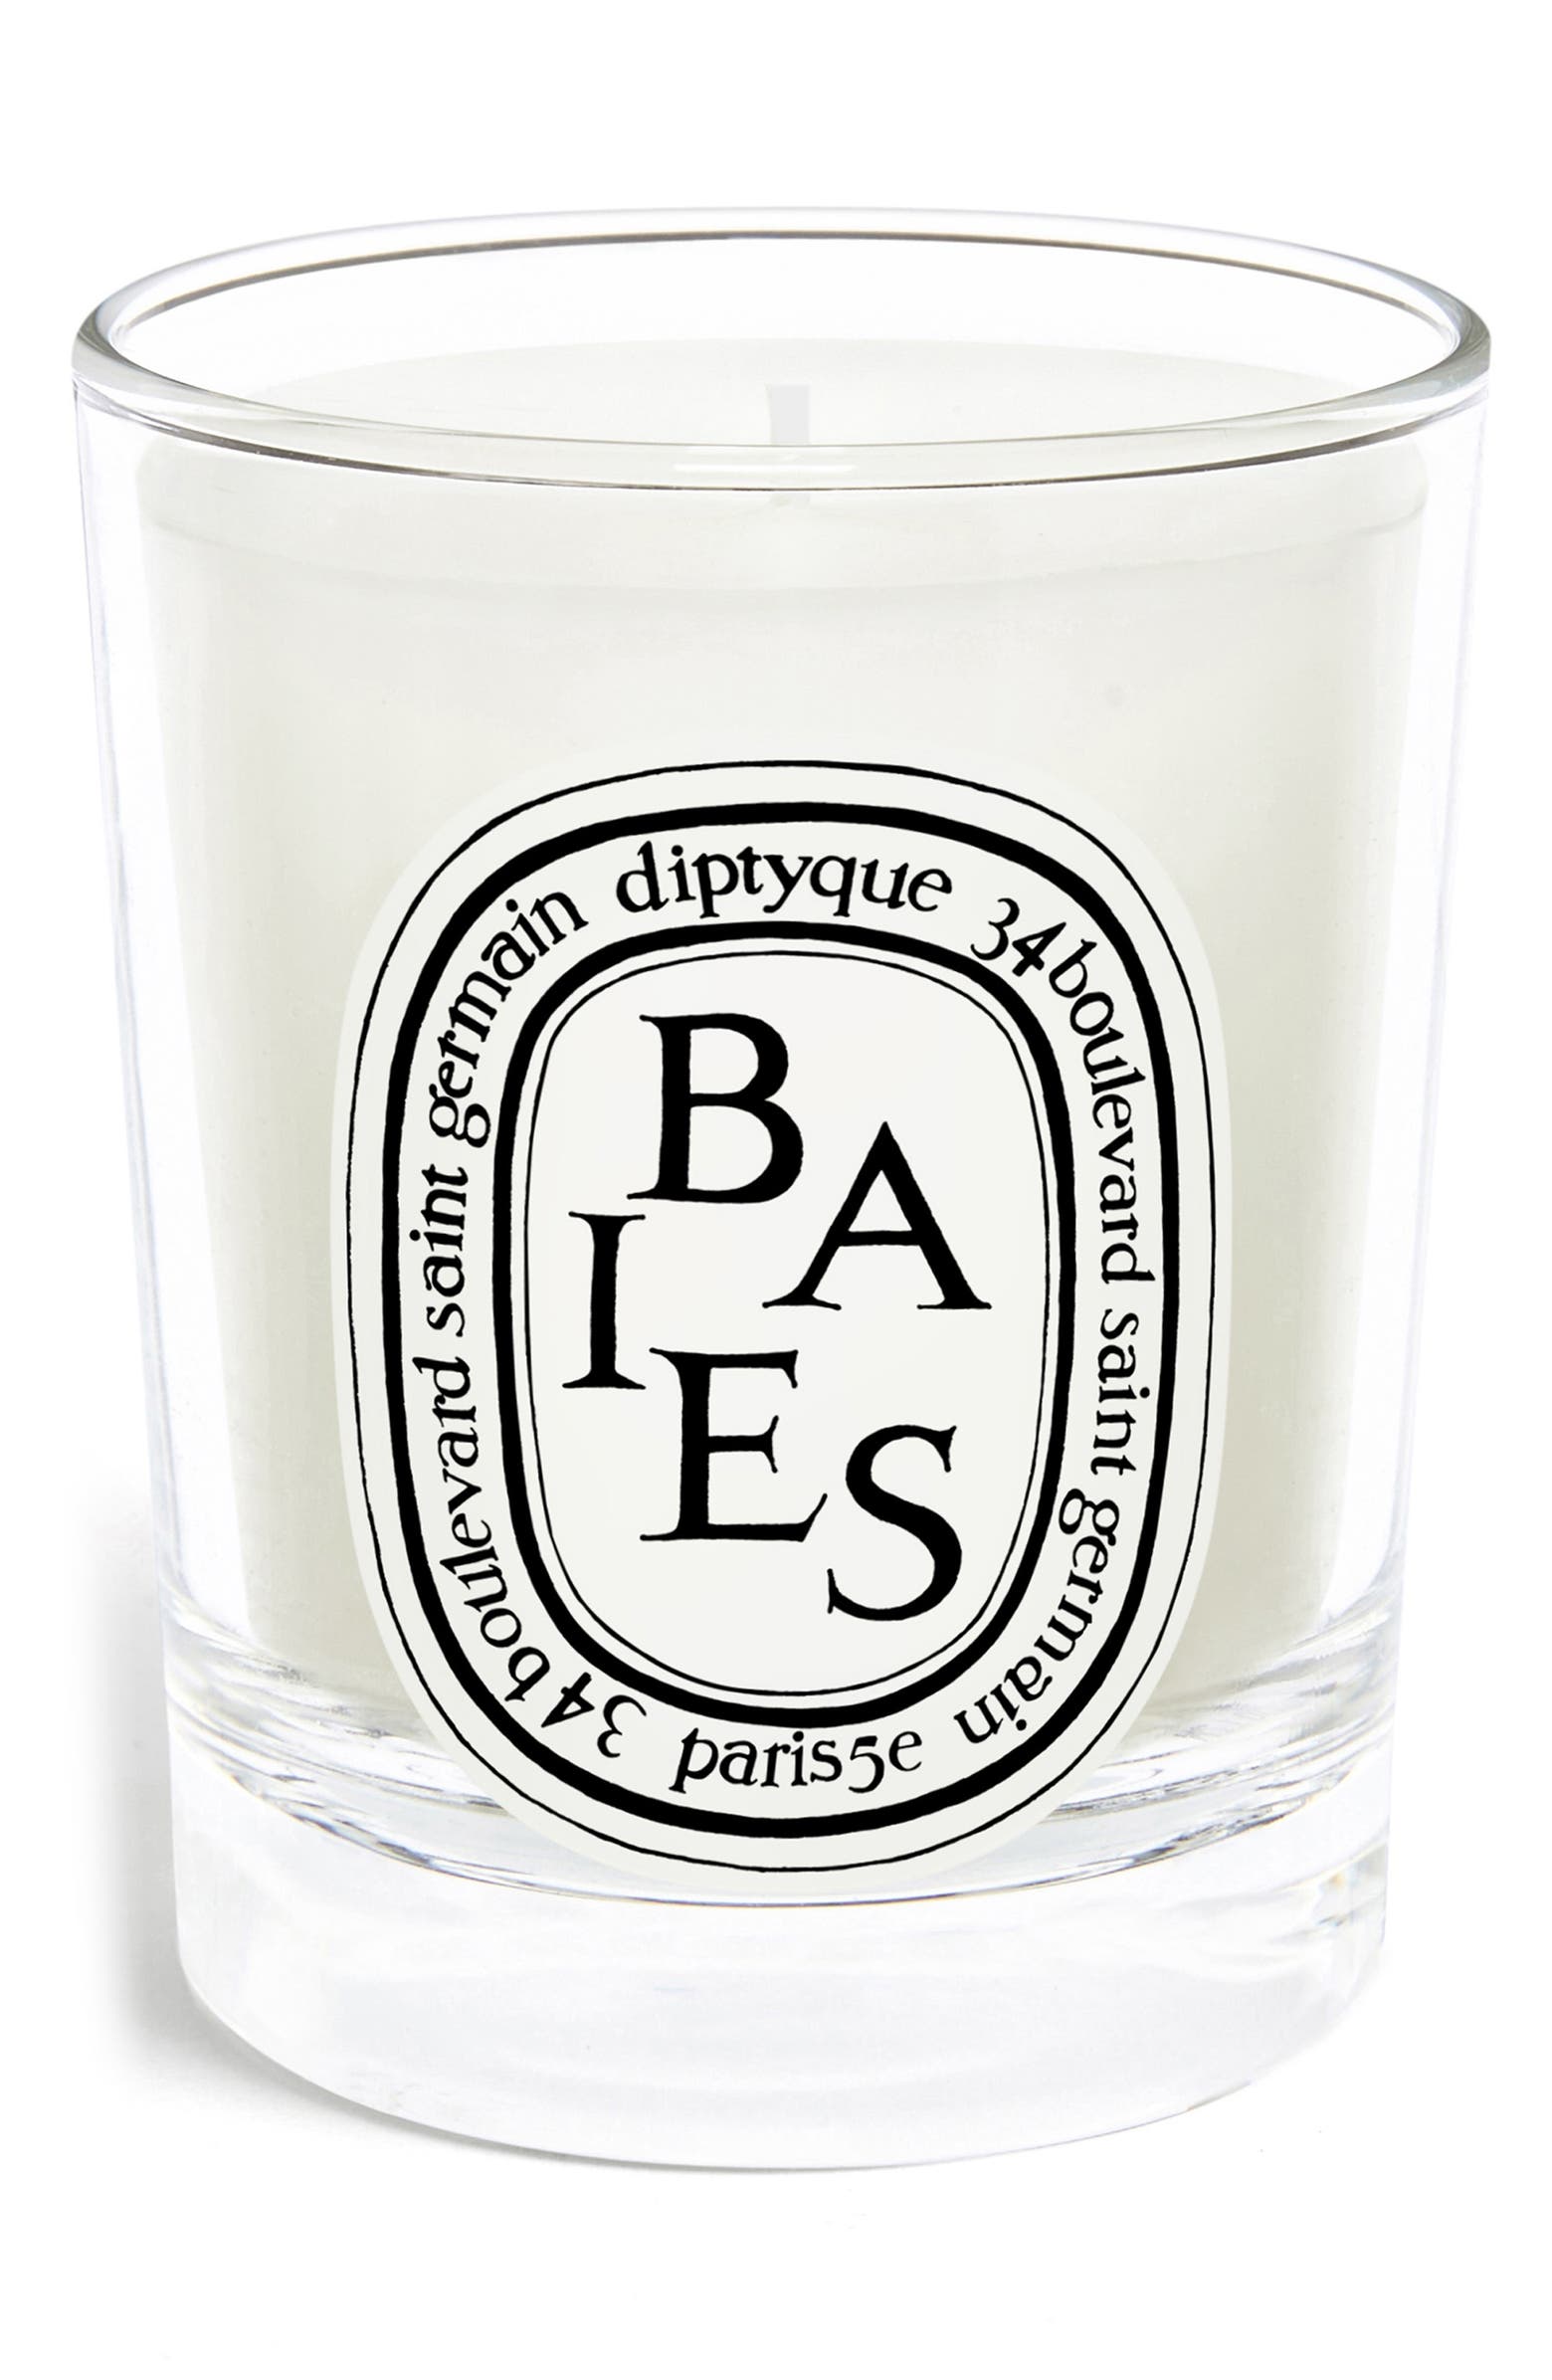 Our Favorite Diptyque VS Jo Malone Products: Diptyque Baies